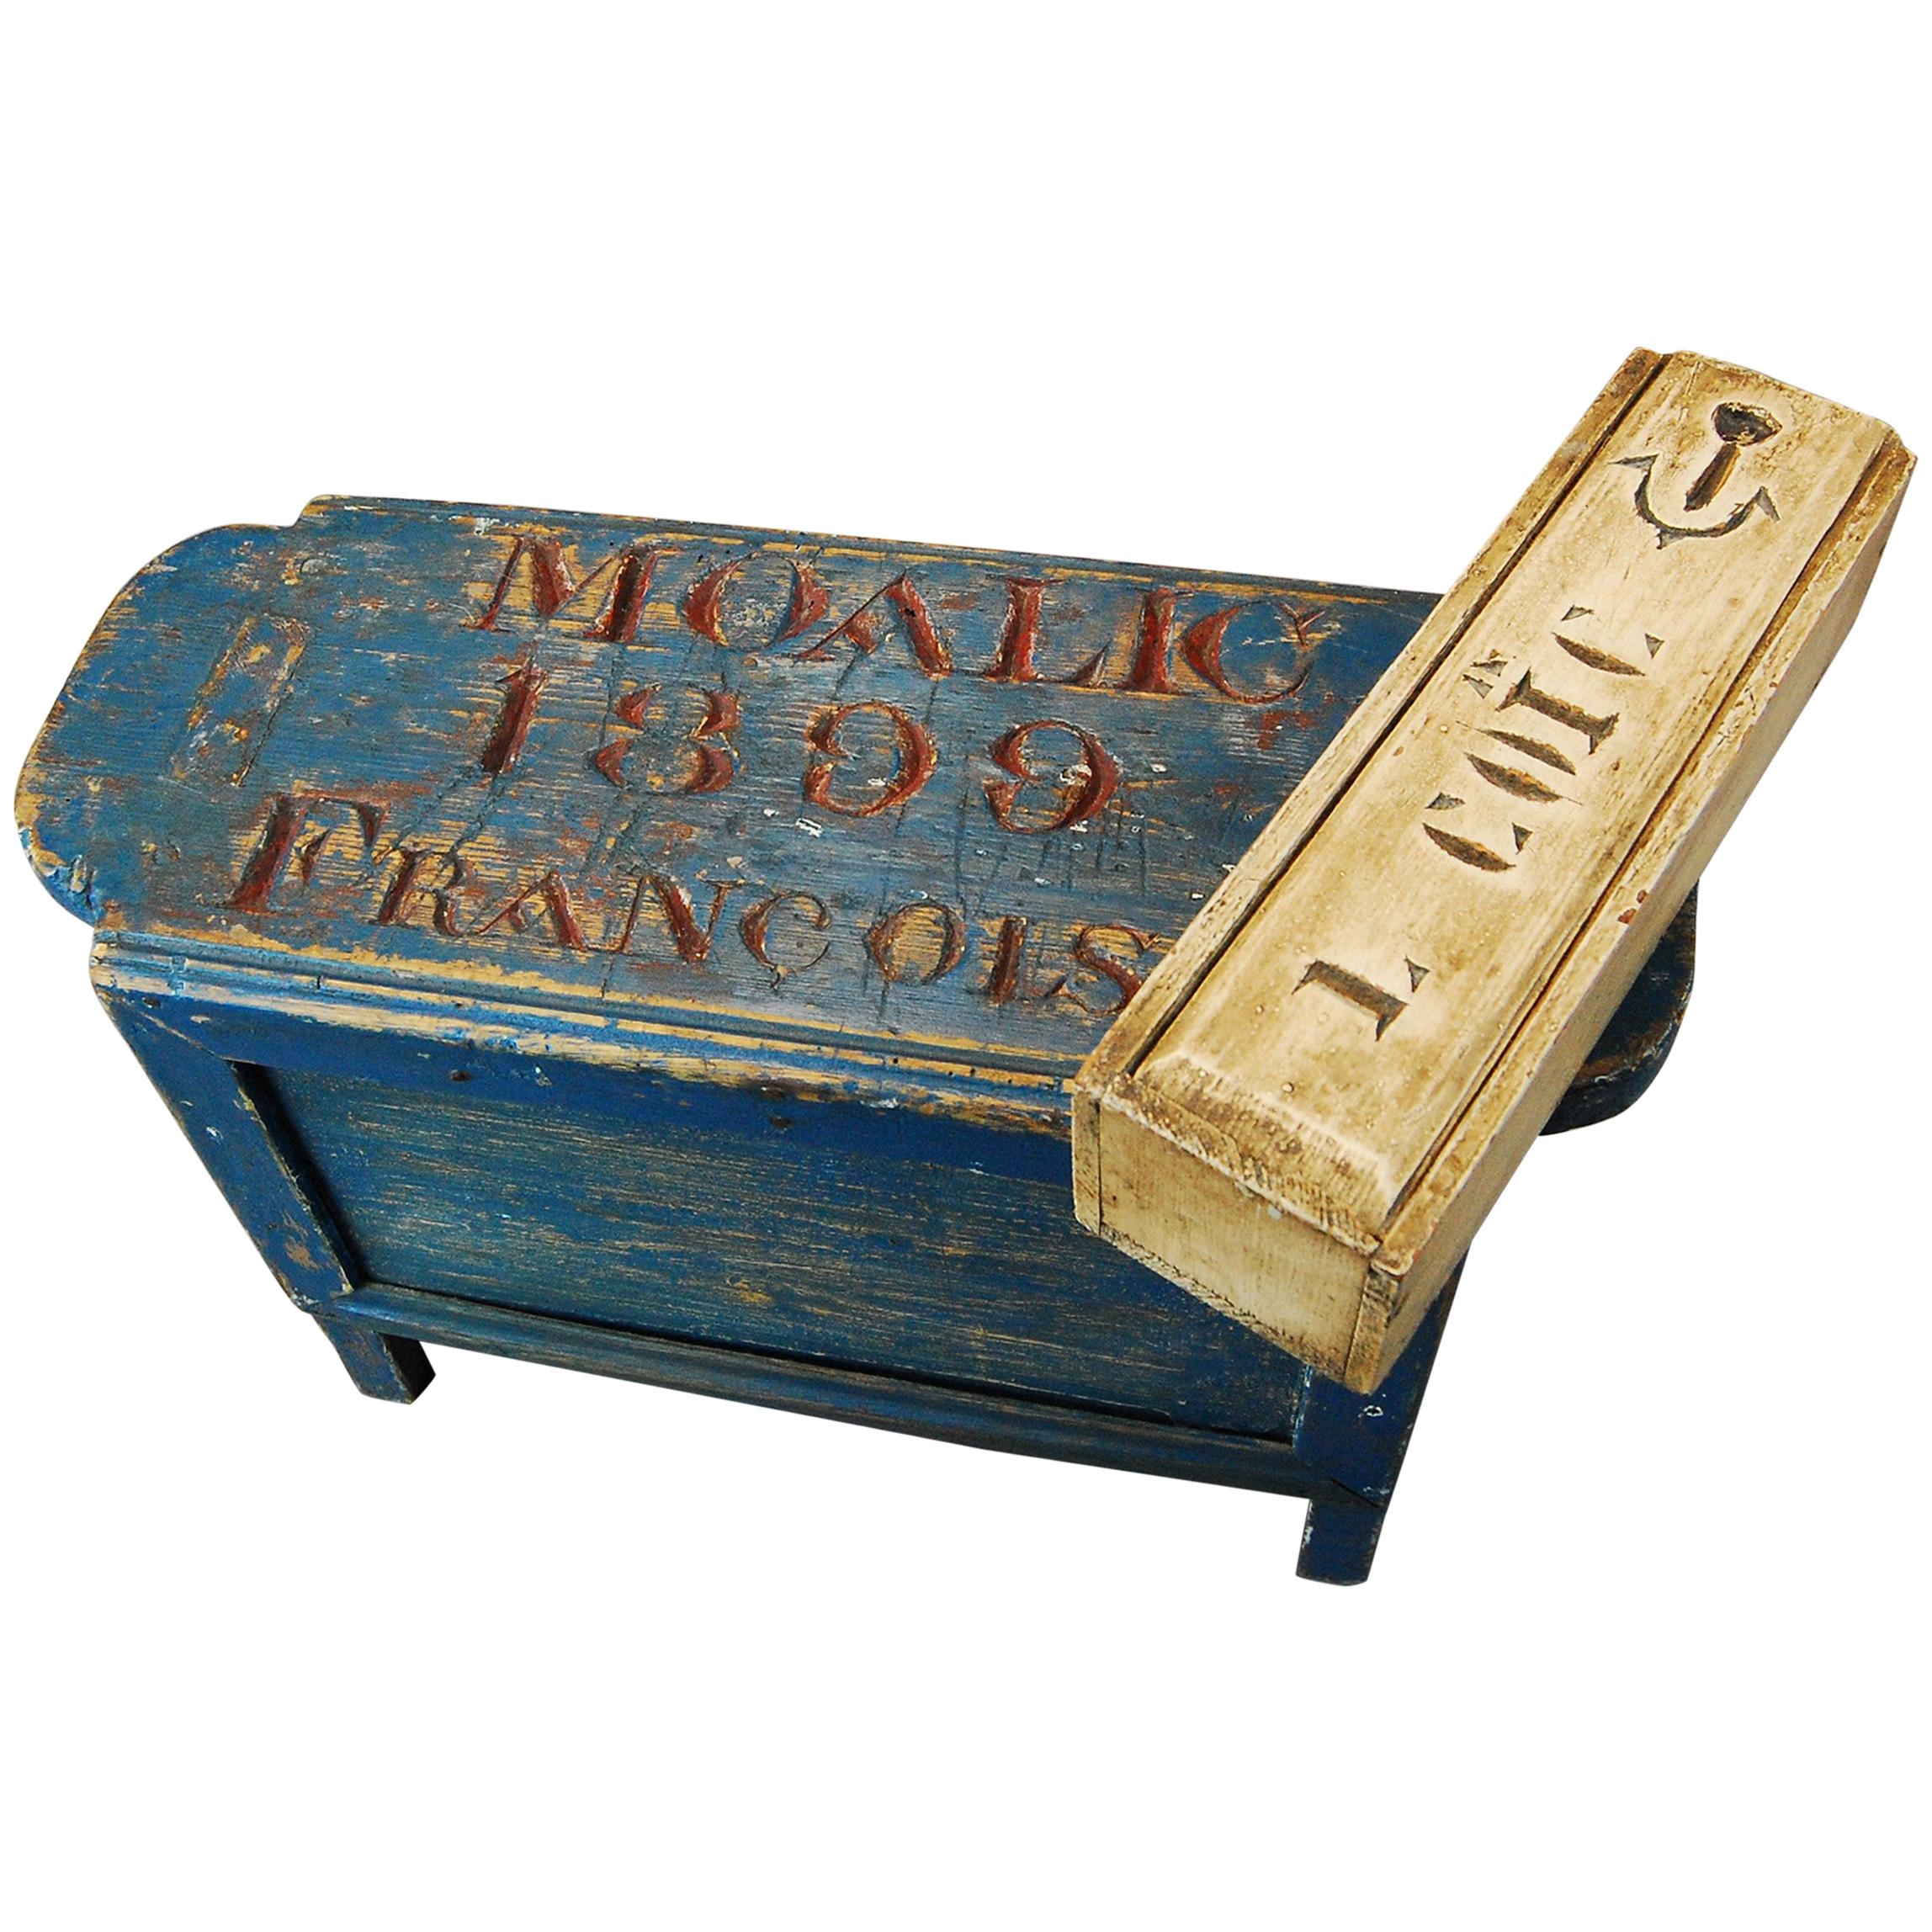 https://a.1stdibscdn.com/19th-century-fisherman-stool-and-tacklebox-for-sale/1121189/f_200608521596471727288/20060852_master.jpg